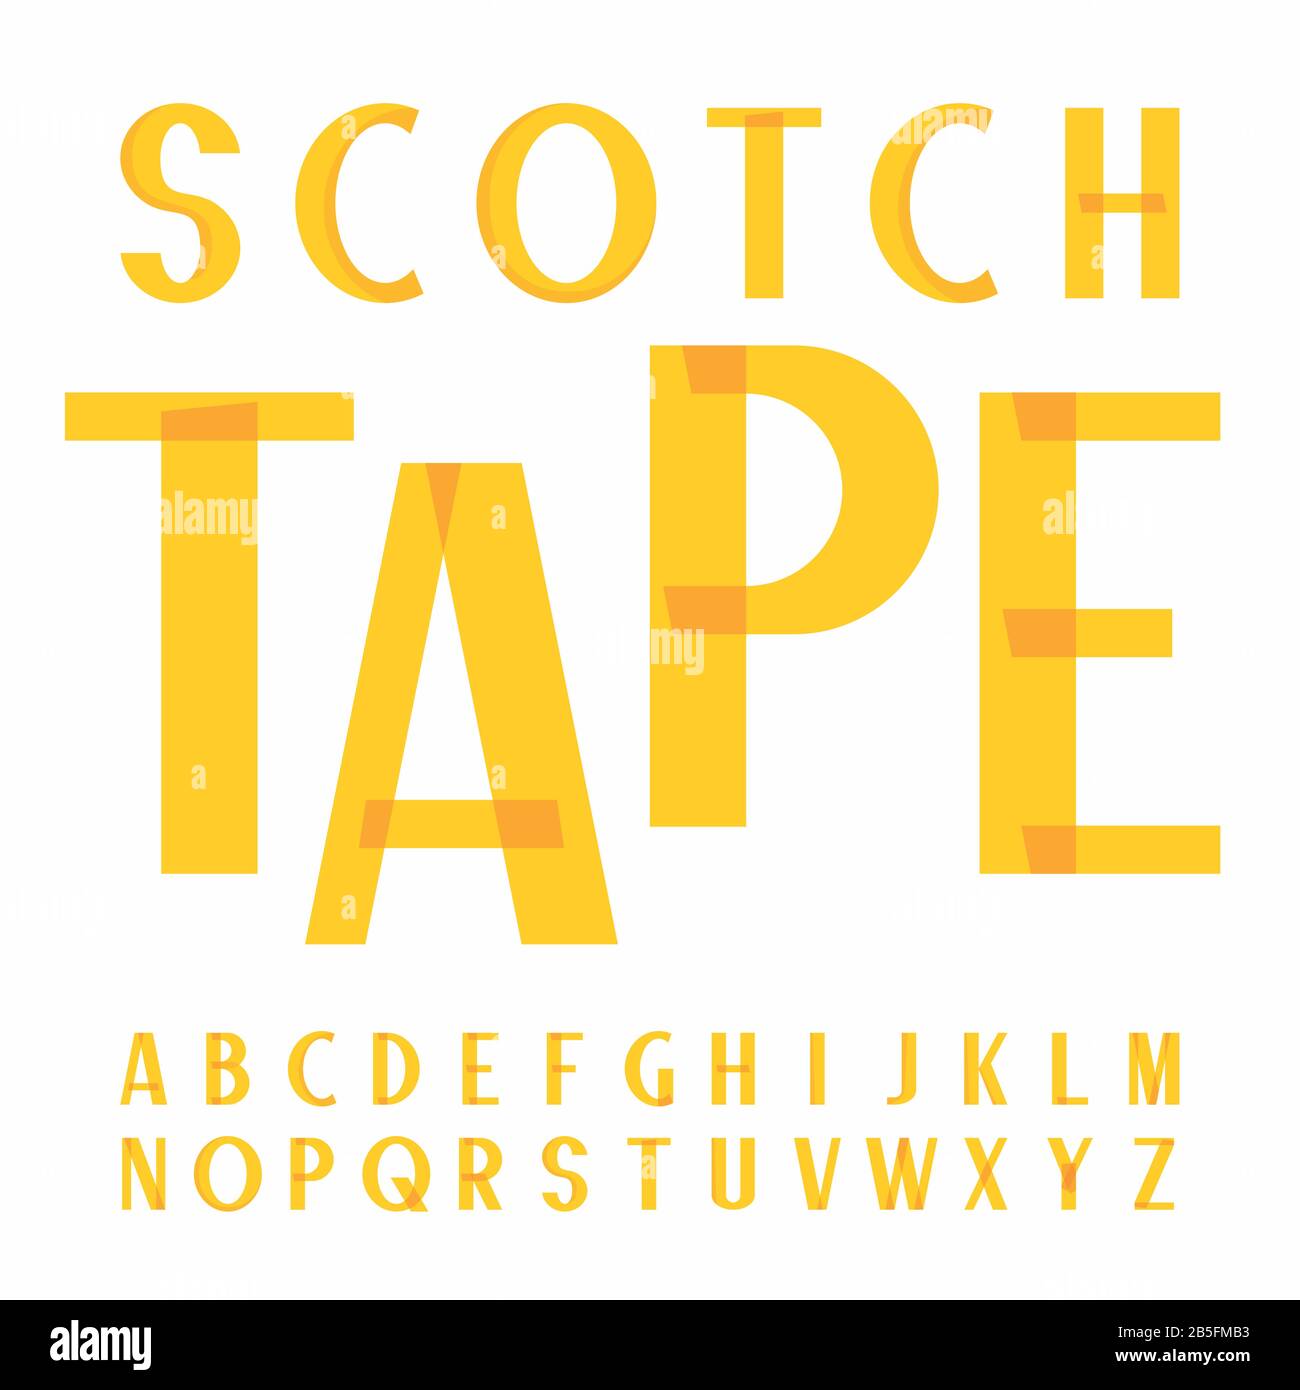 Scotch Tape Style Childish Vector Typeface. Flat geometric uppercase narrow font. Decorative Typography. Stock Vector